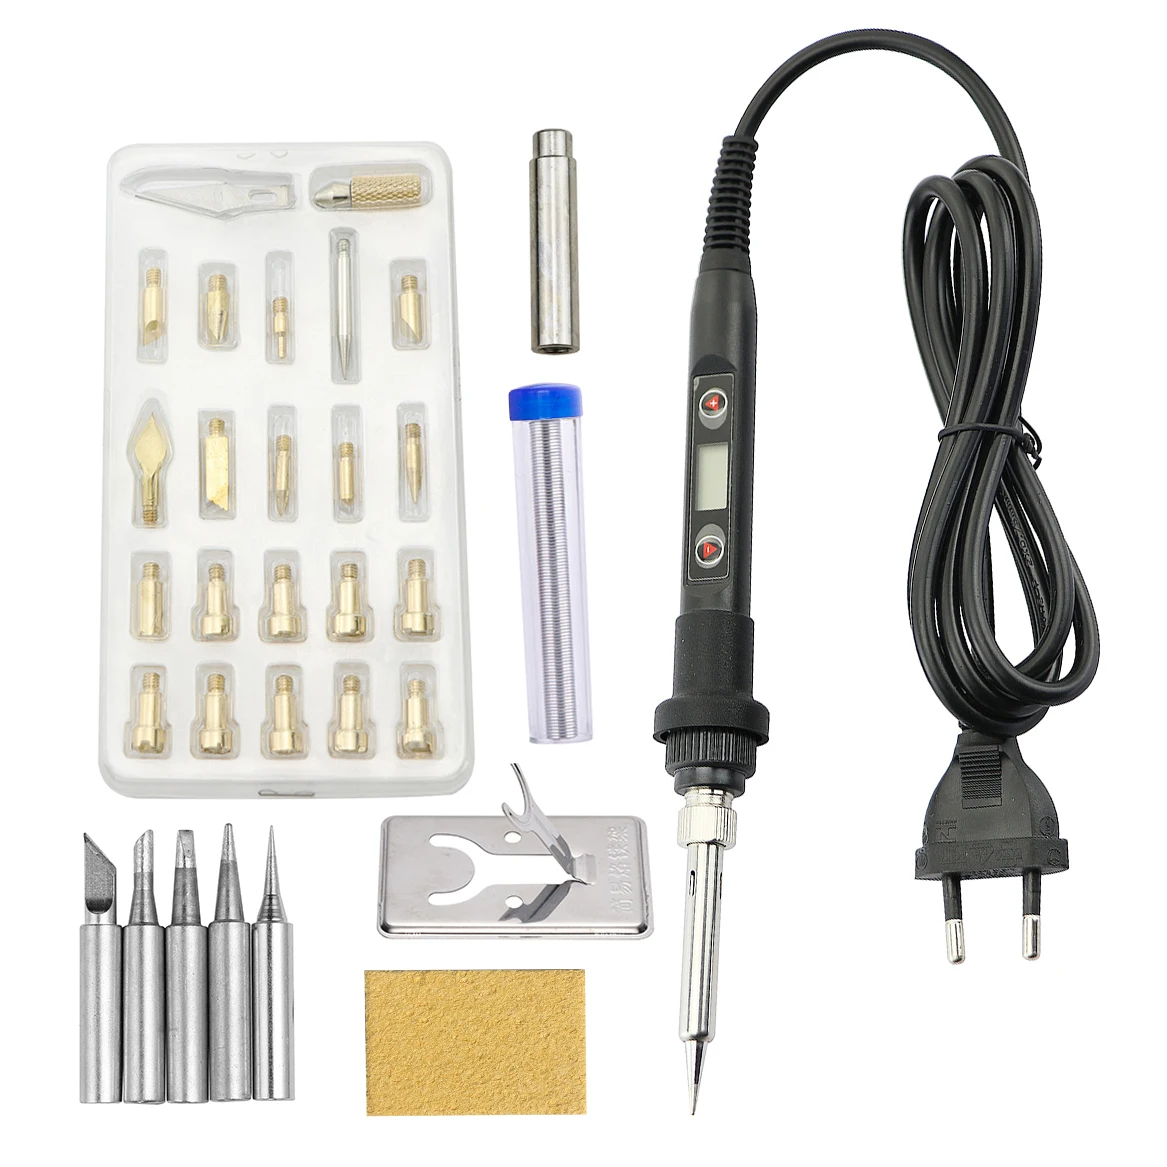 

22 in 1 Wood Embossing Burning Carving Pyrography Pen Tools Kit 60W 80W Adjustable Temperature Soldering Iron Hand Operated Set